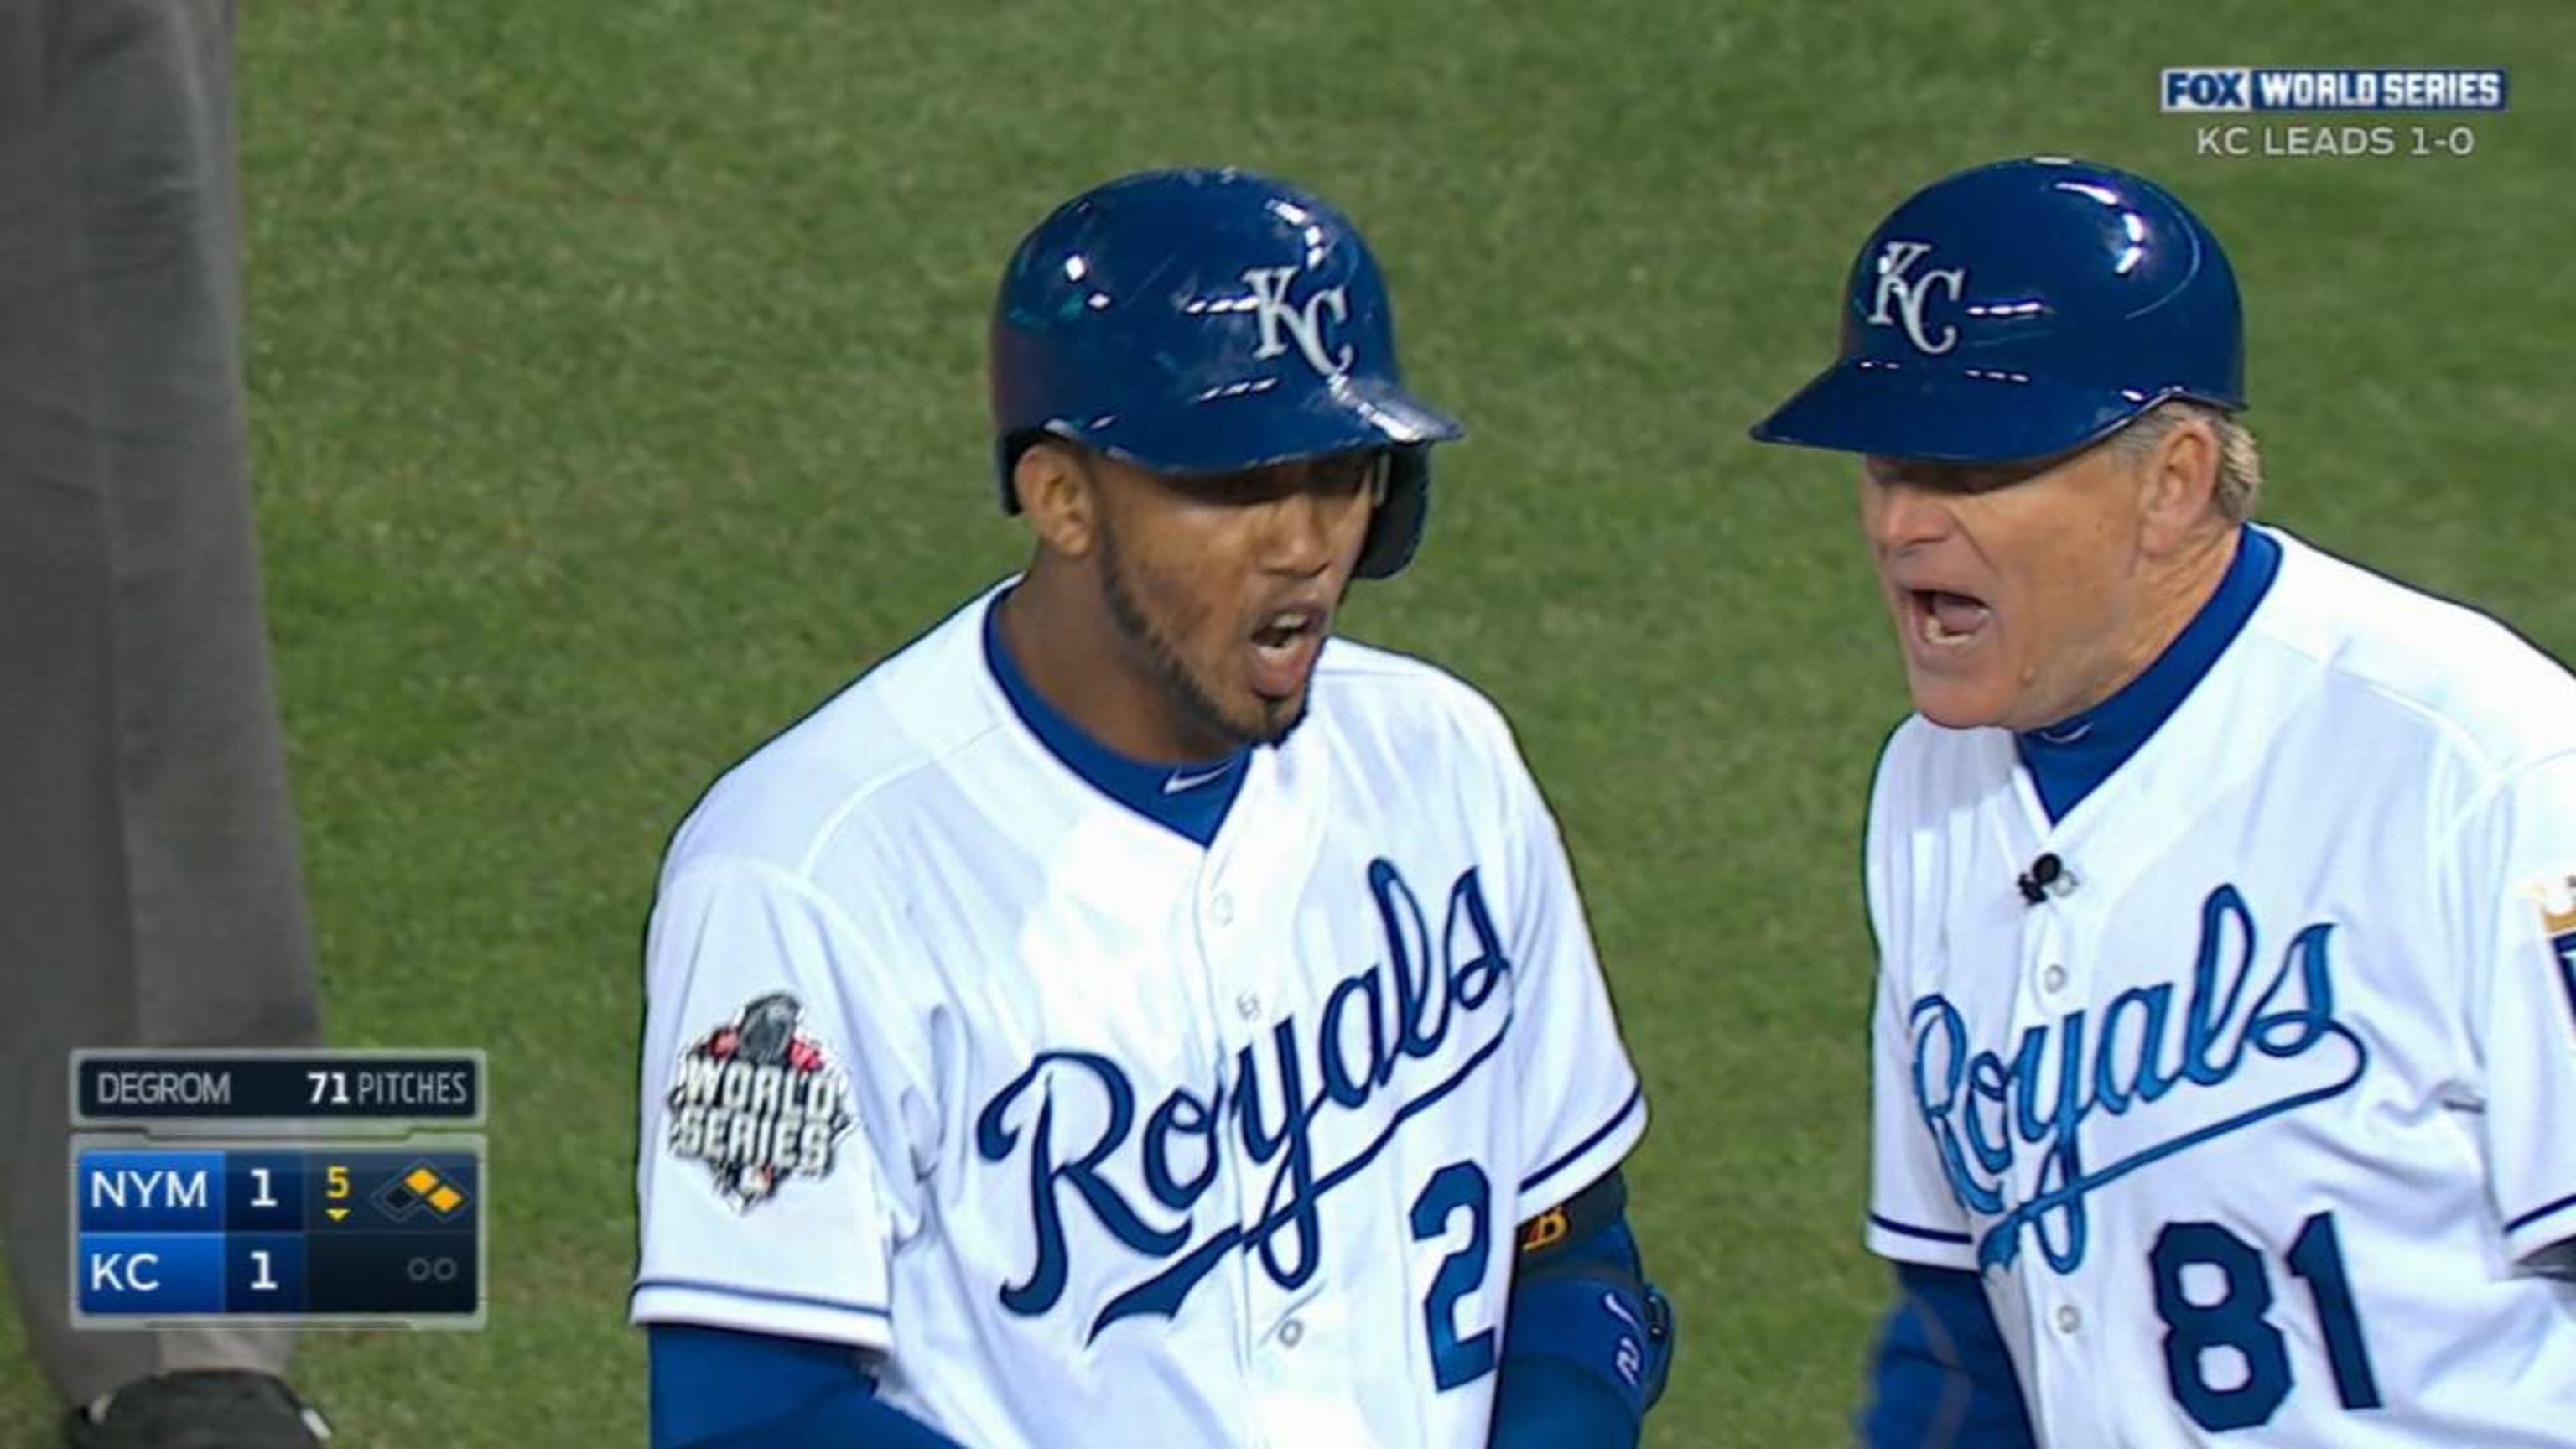 Royals finish off Mets to win World Series